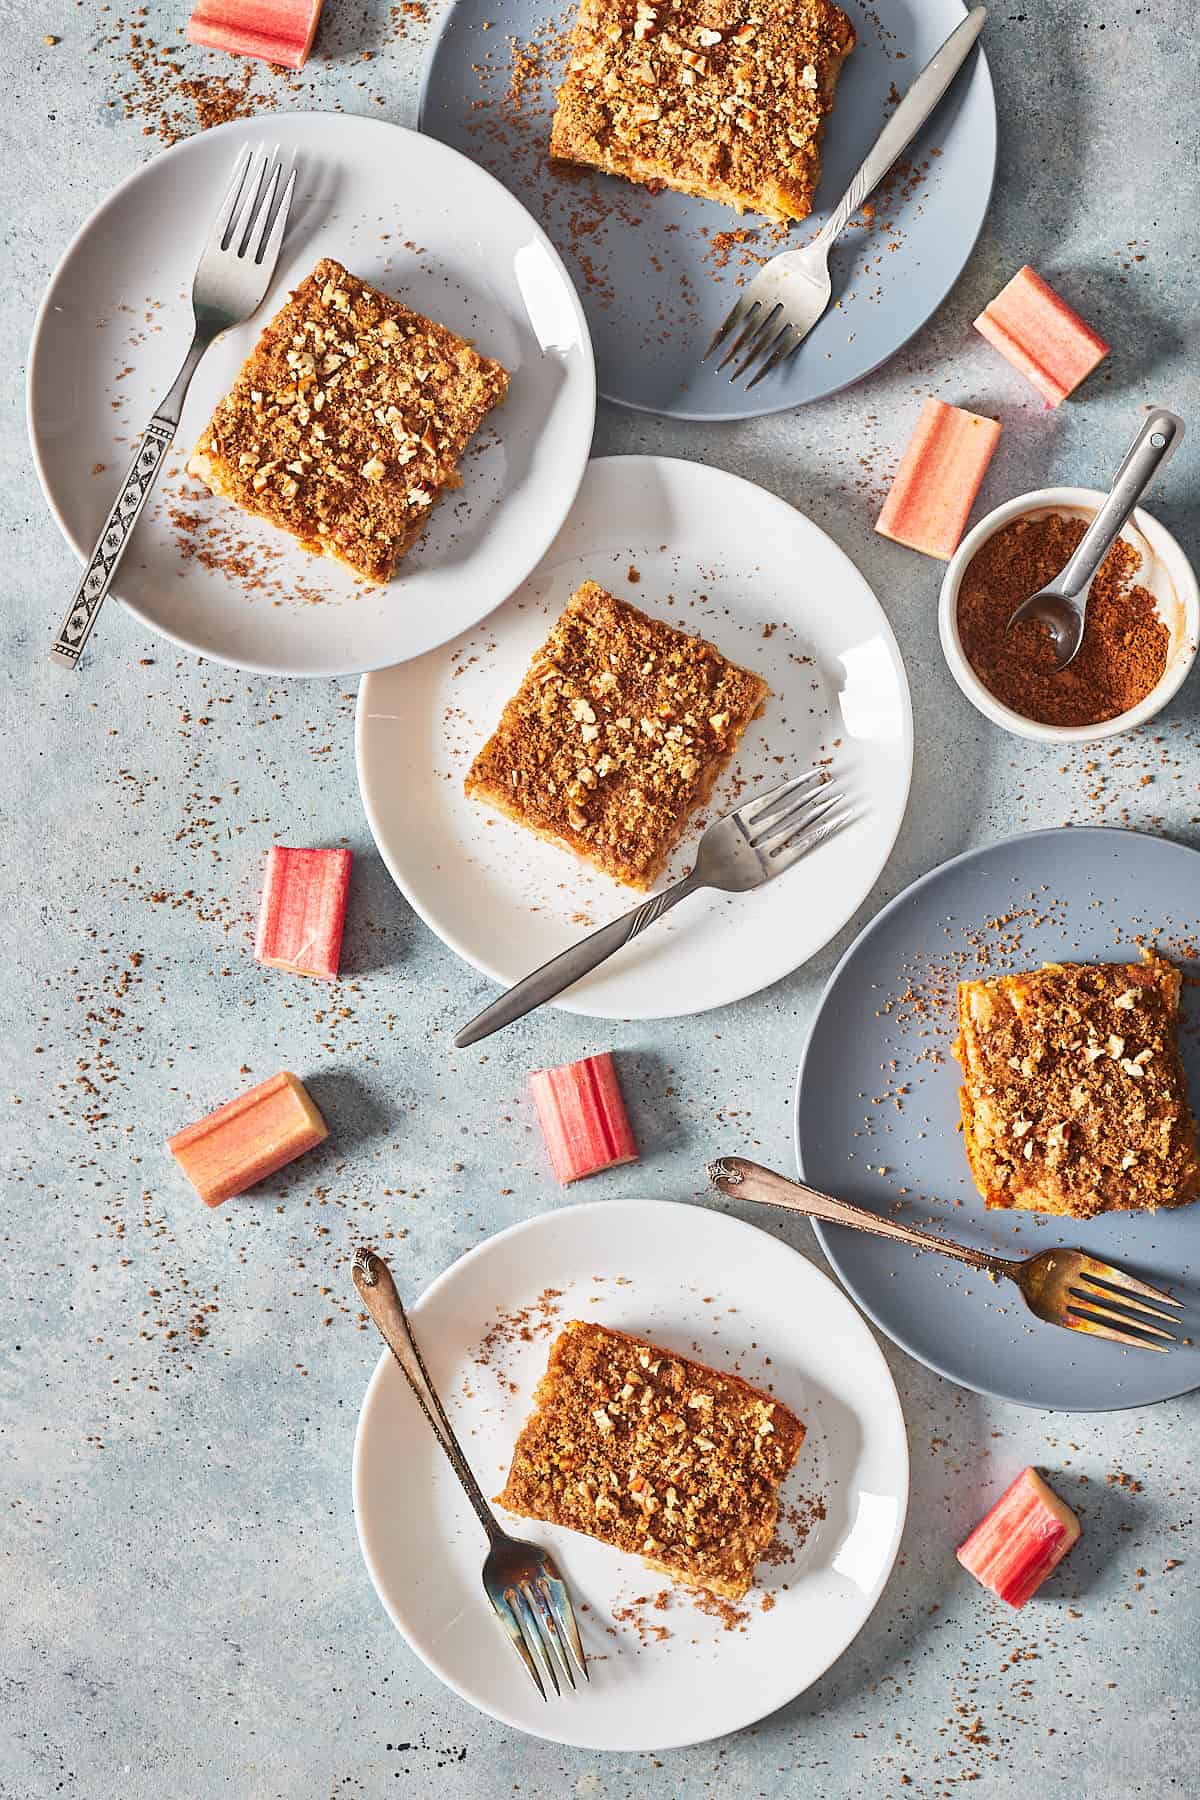 rhubarb cake on plates with forks